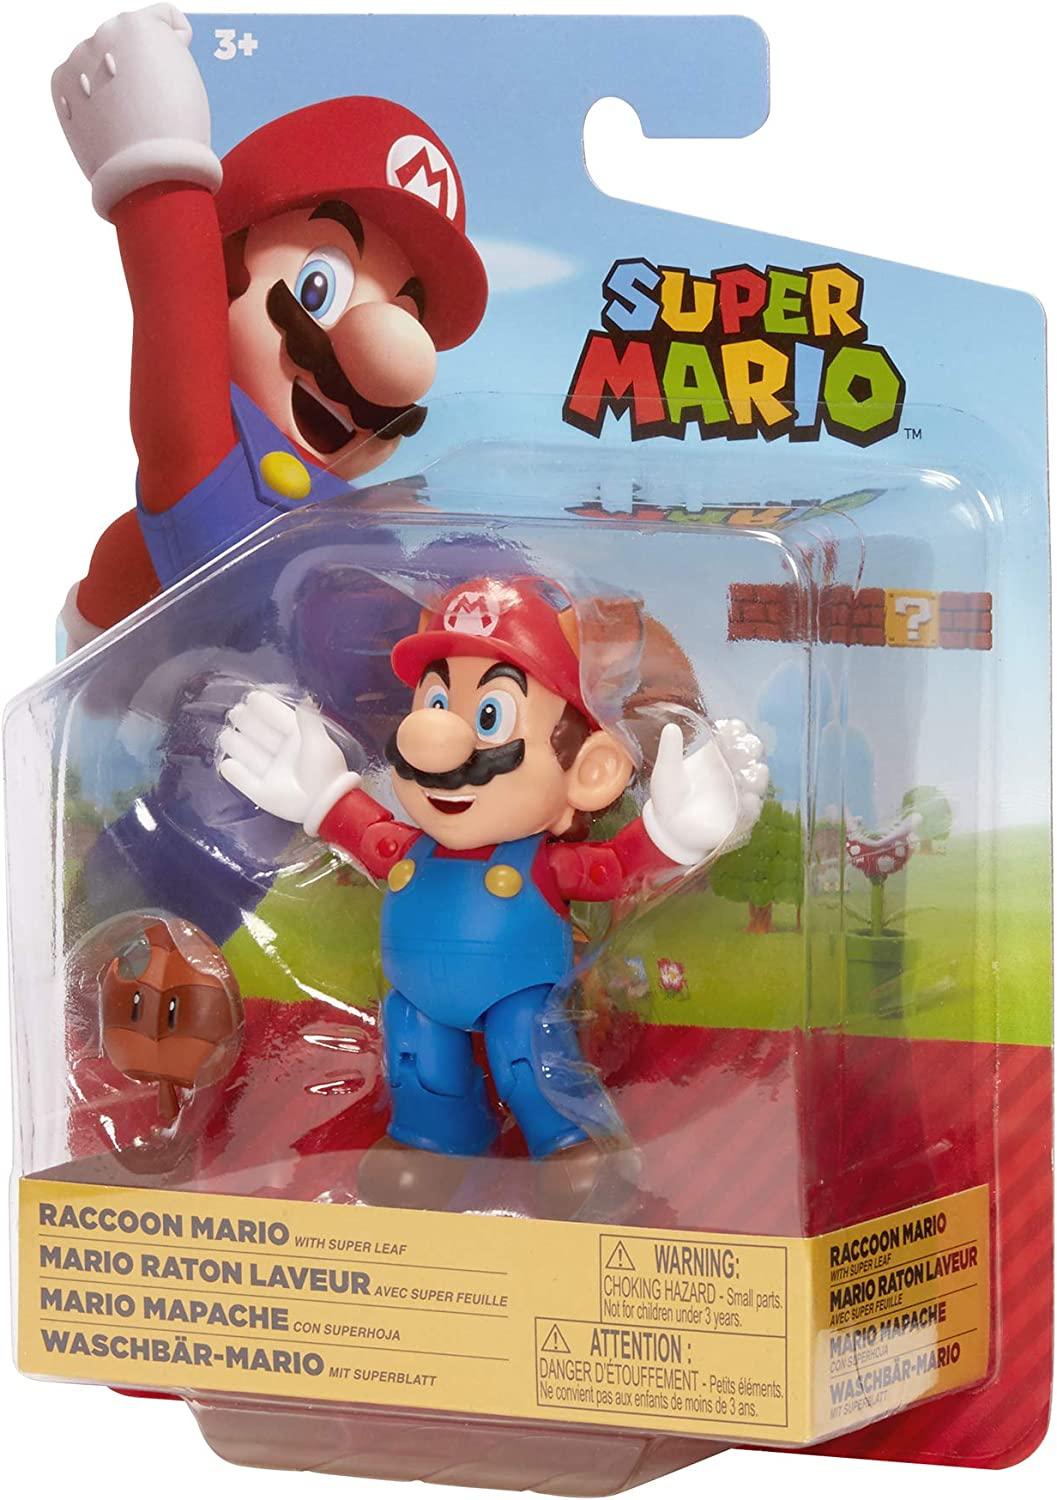 Another Mario Pikachu figurine! : r/AwesomeOffBrands